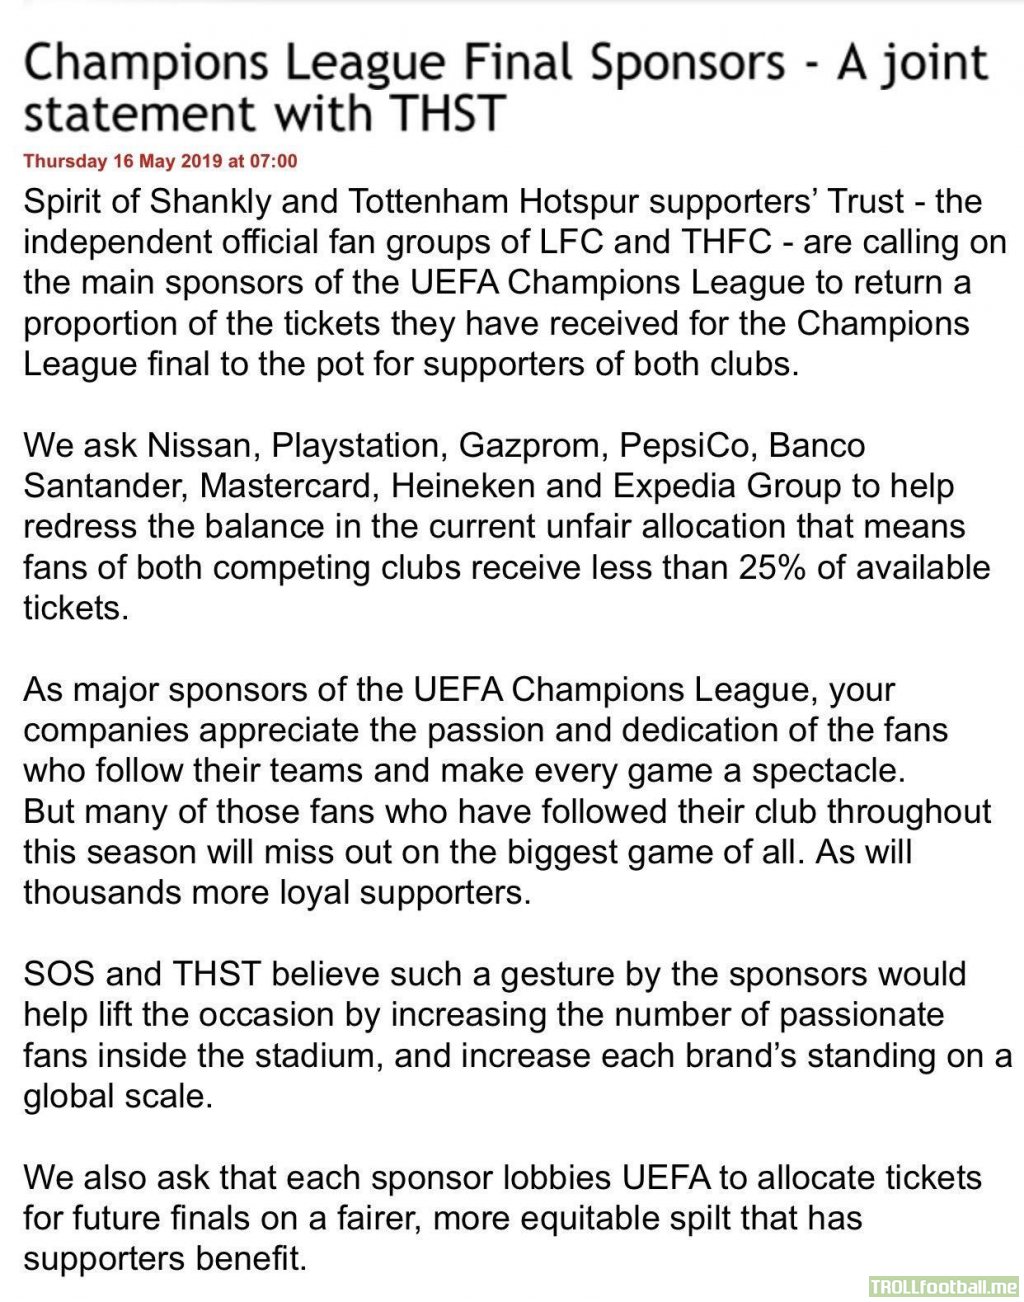 A statement by Spirit of Shankly @THSTOfficial on the Champions League Final. #ForTheFans